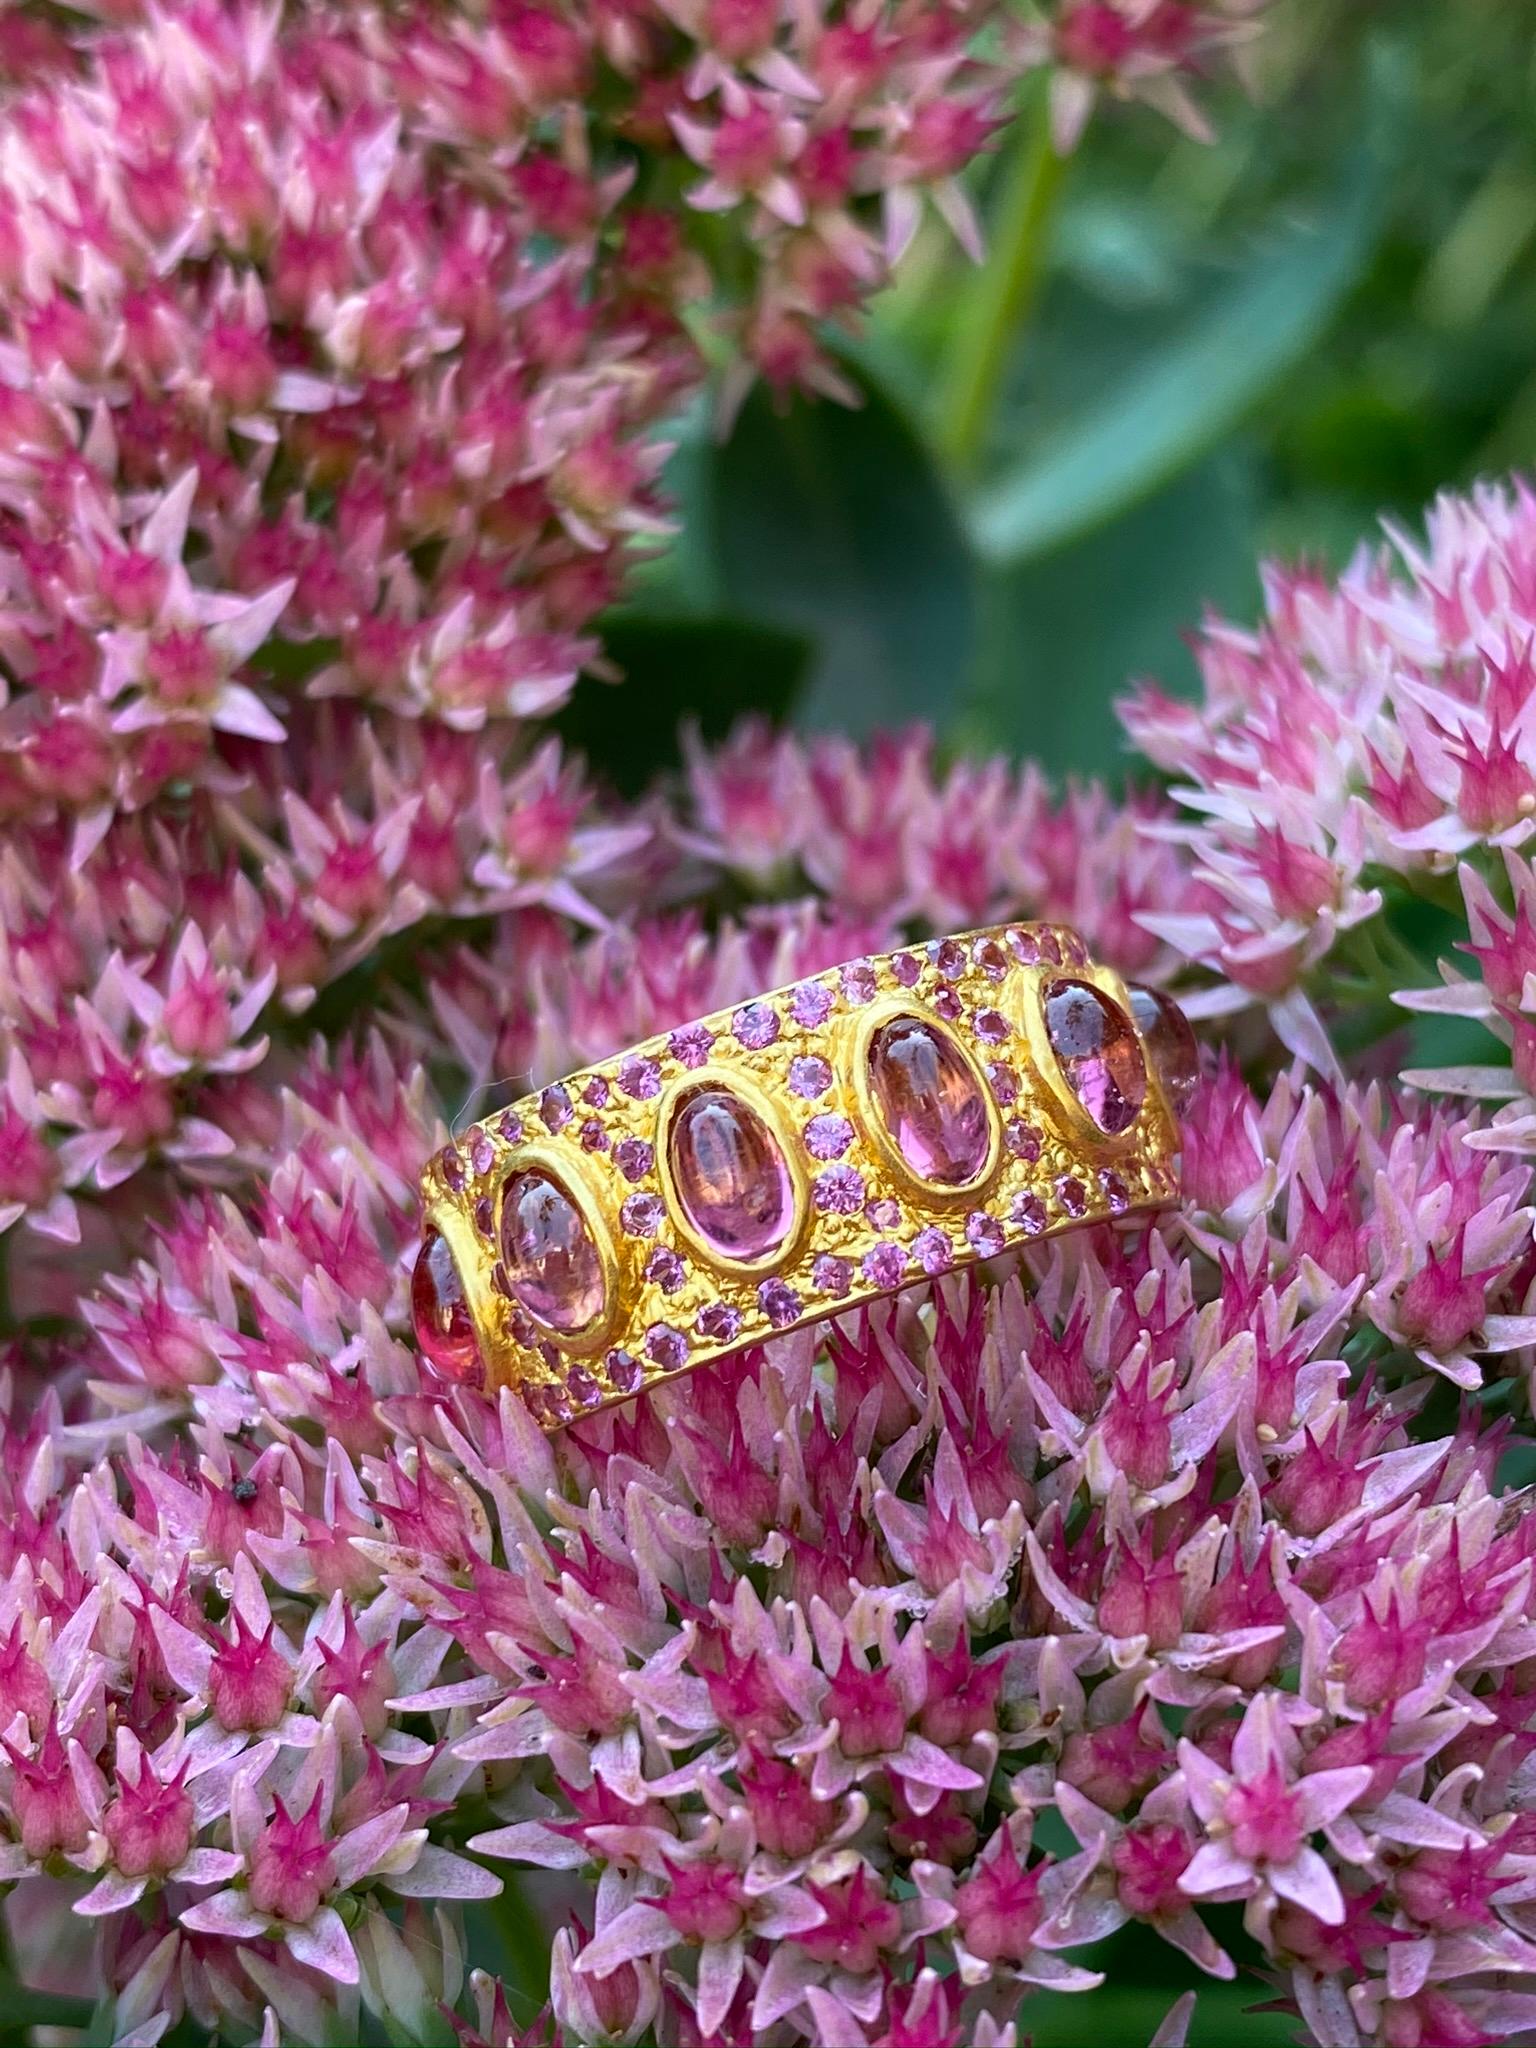 Designed by award winning jewelry designer, Lauren Harper, this stunning eternity band is studded in 4.68 carats of brilliant Pink cabachon Tourmalines that are surrounded by faceted pink Tourmaline, and set in a warm tone of 18kt Gold. Comfortable